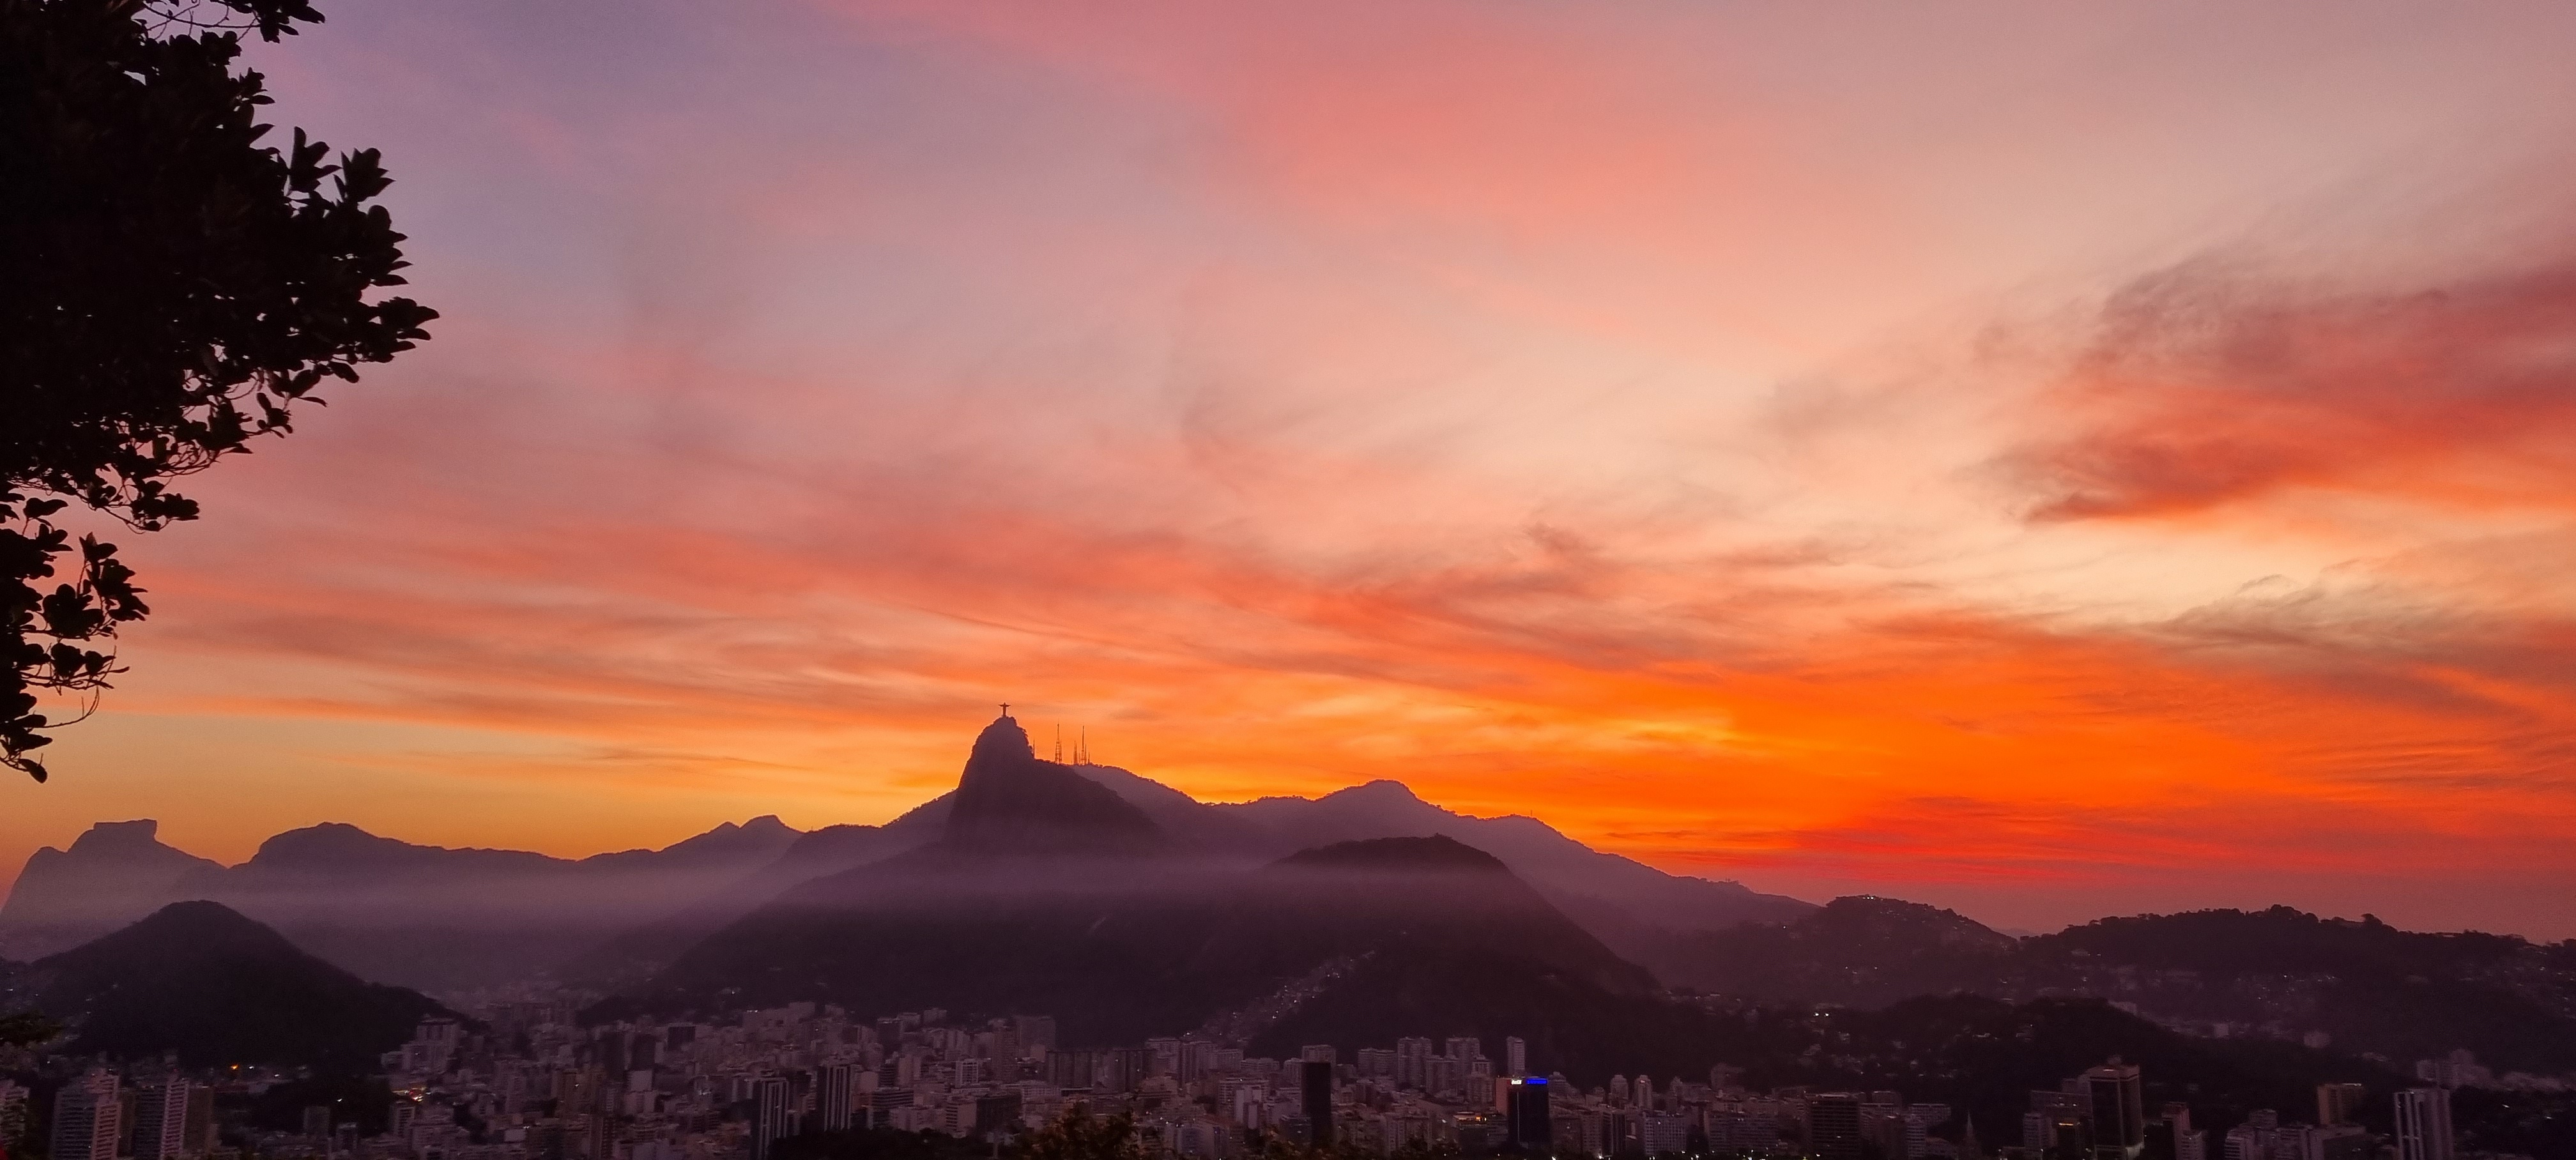 View of Rio de Janeiro from the top of the Sugarloaf Mountain. It is sunset, so the sky has a lot of red, orange and yellow tones. Christ the Redeemer can be seen in the middle of the picture.